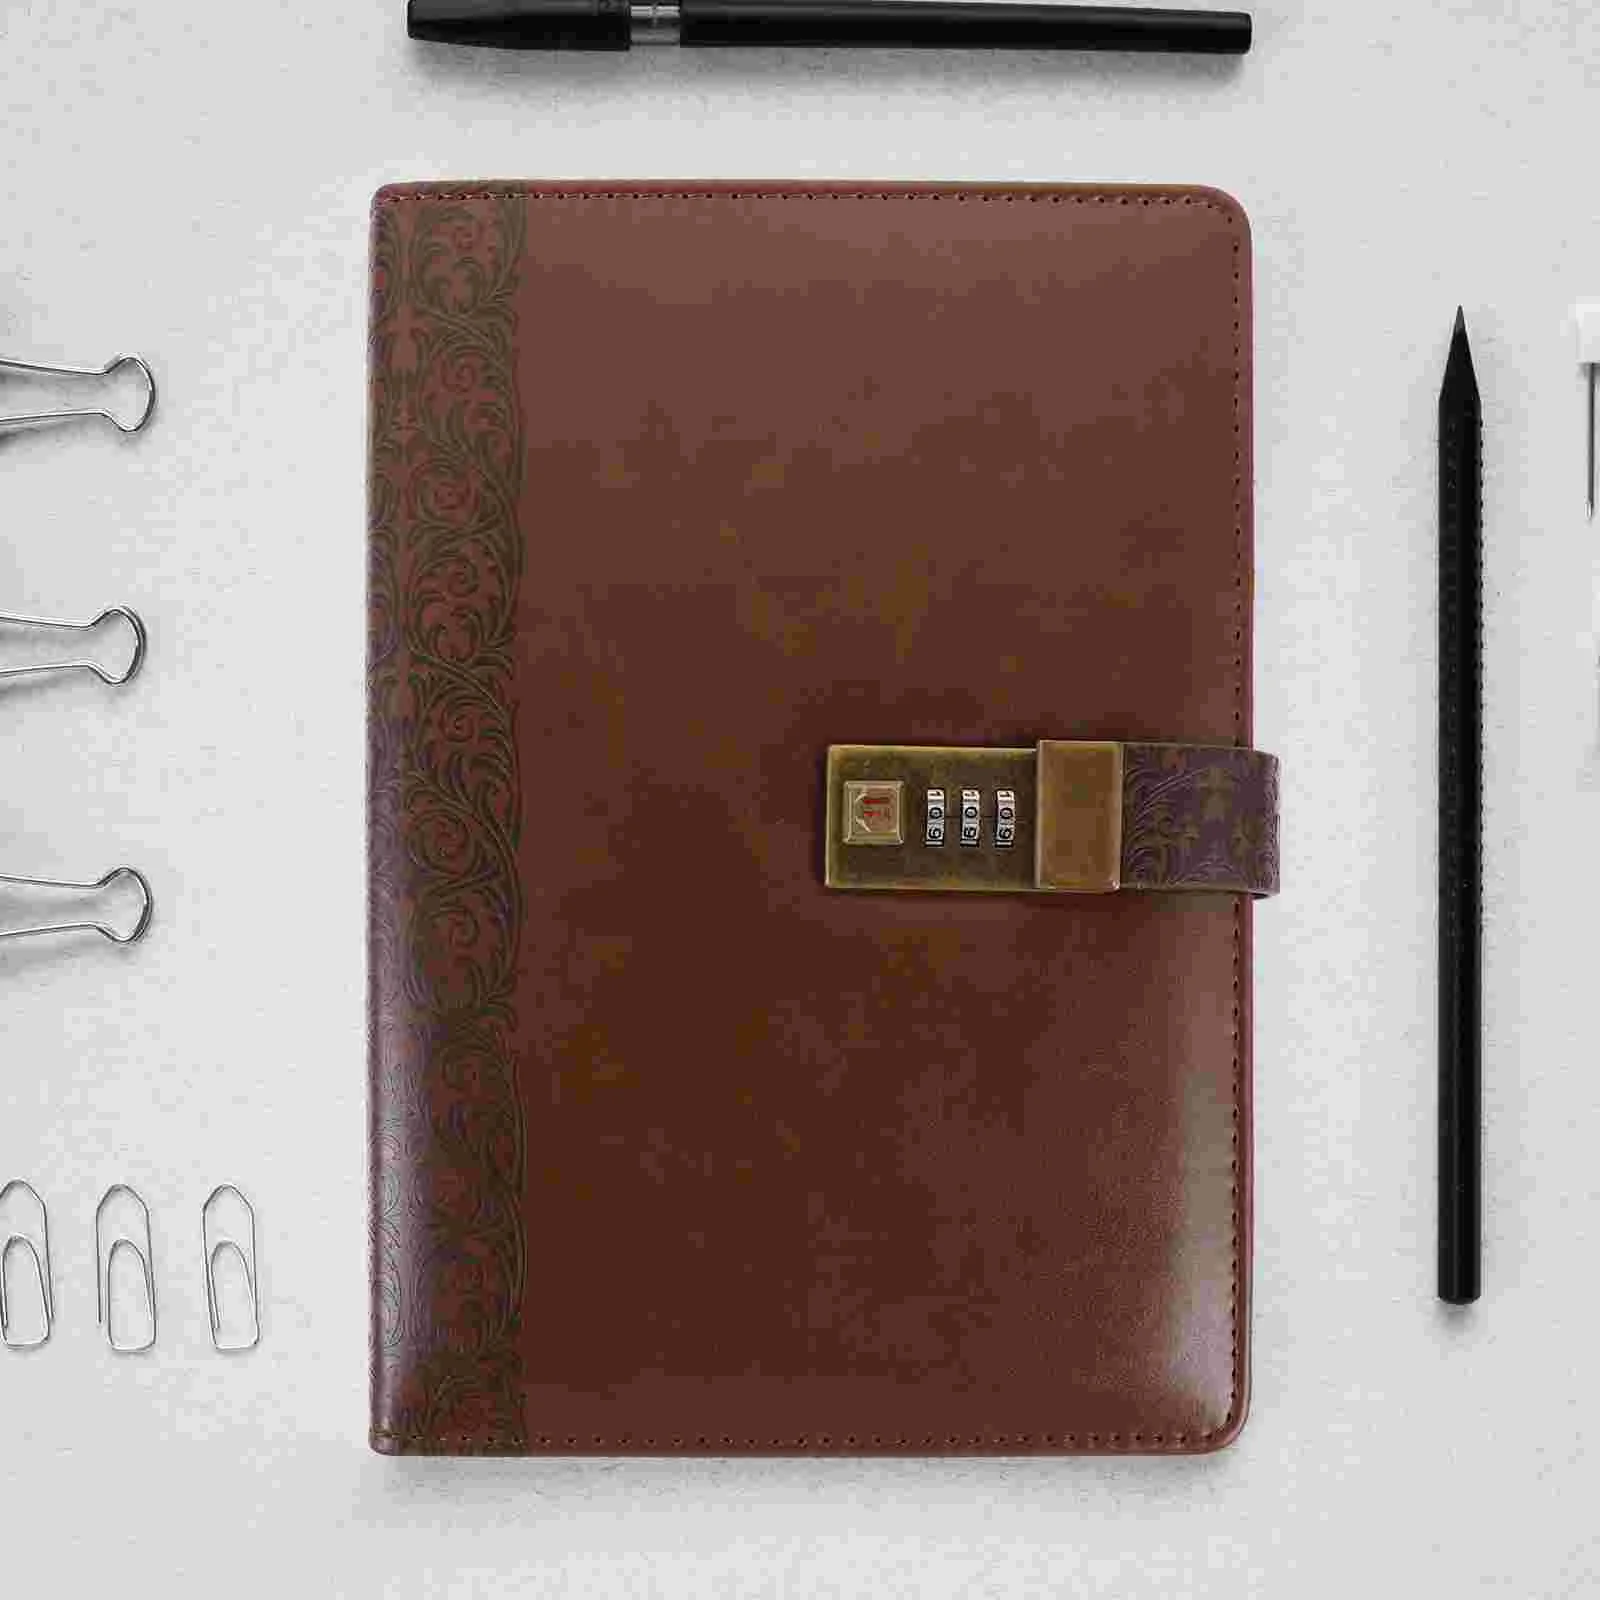 Notepad with Lock Daily Plan Notebook Travel Journal Vintage Office Conference Scrapbook for Nuotrauka 5